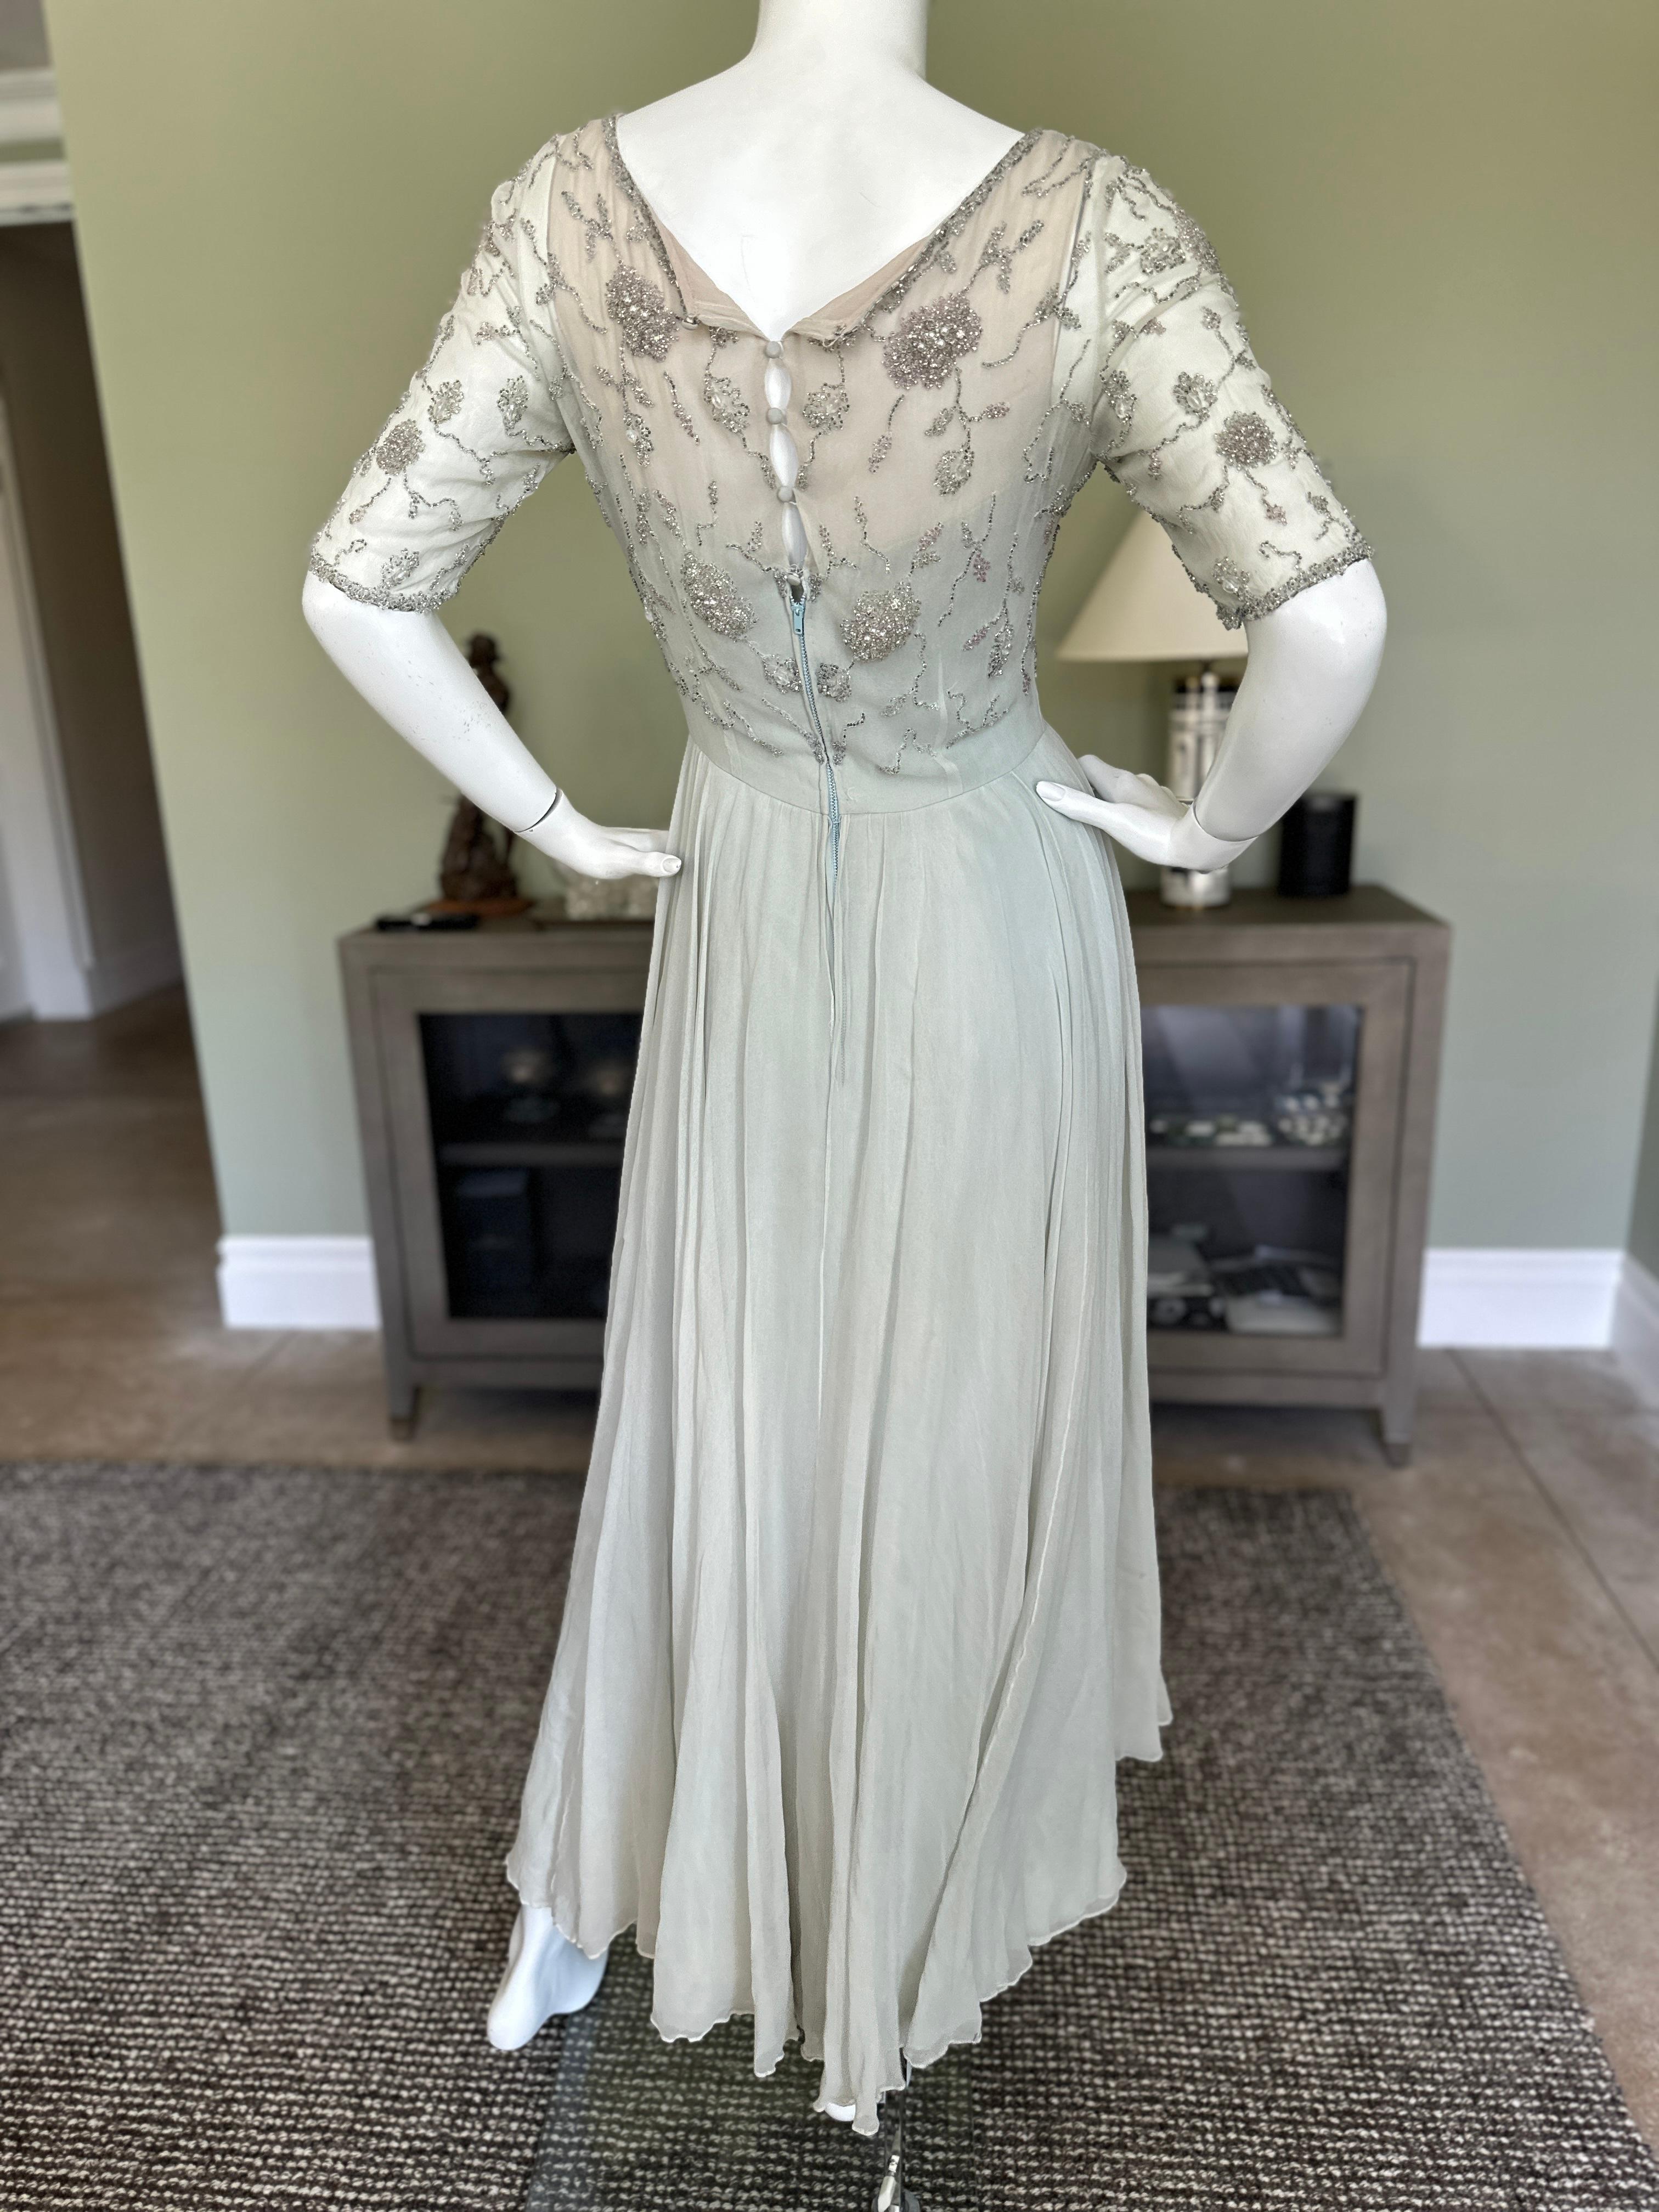  Malcolm Starr Vintage Evening Dress with Crystal Embellishments For Sale 6